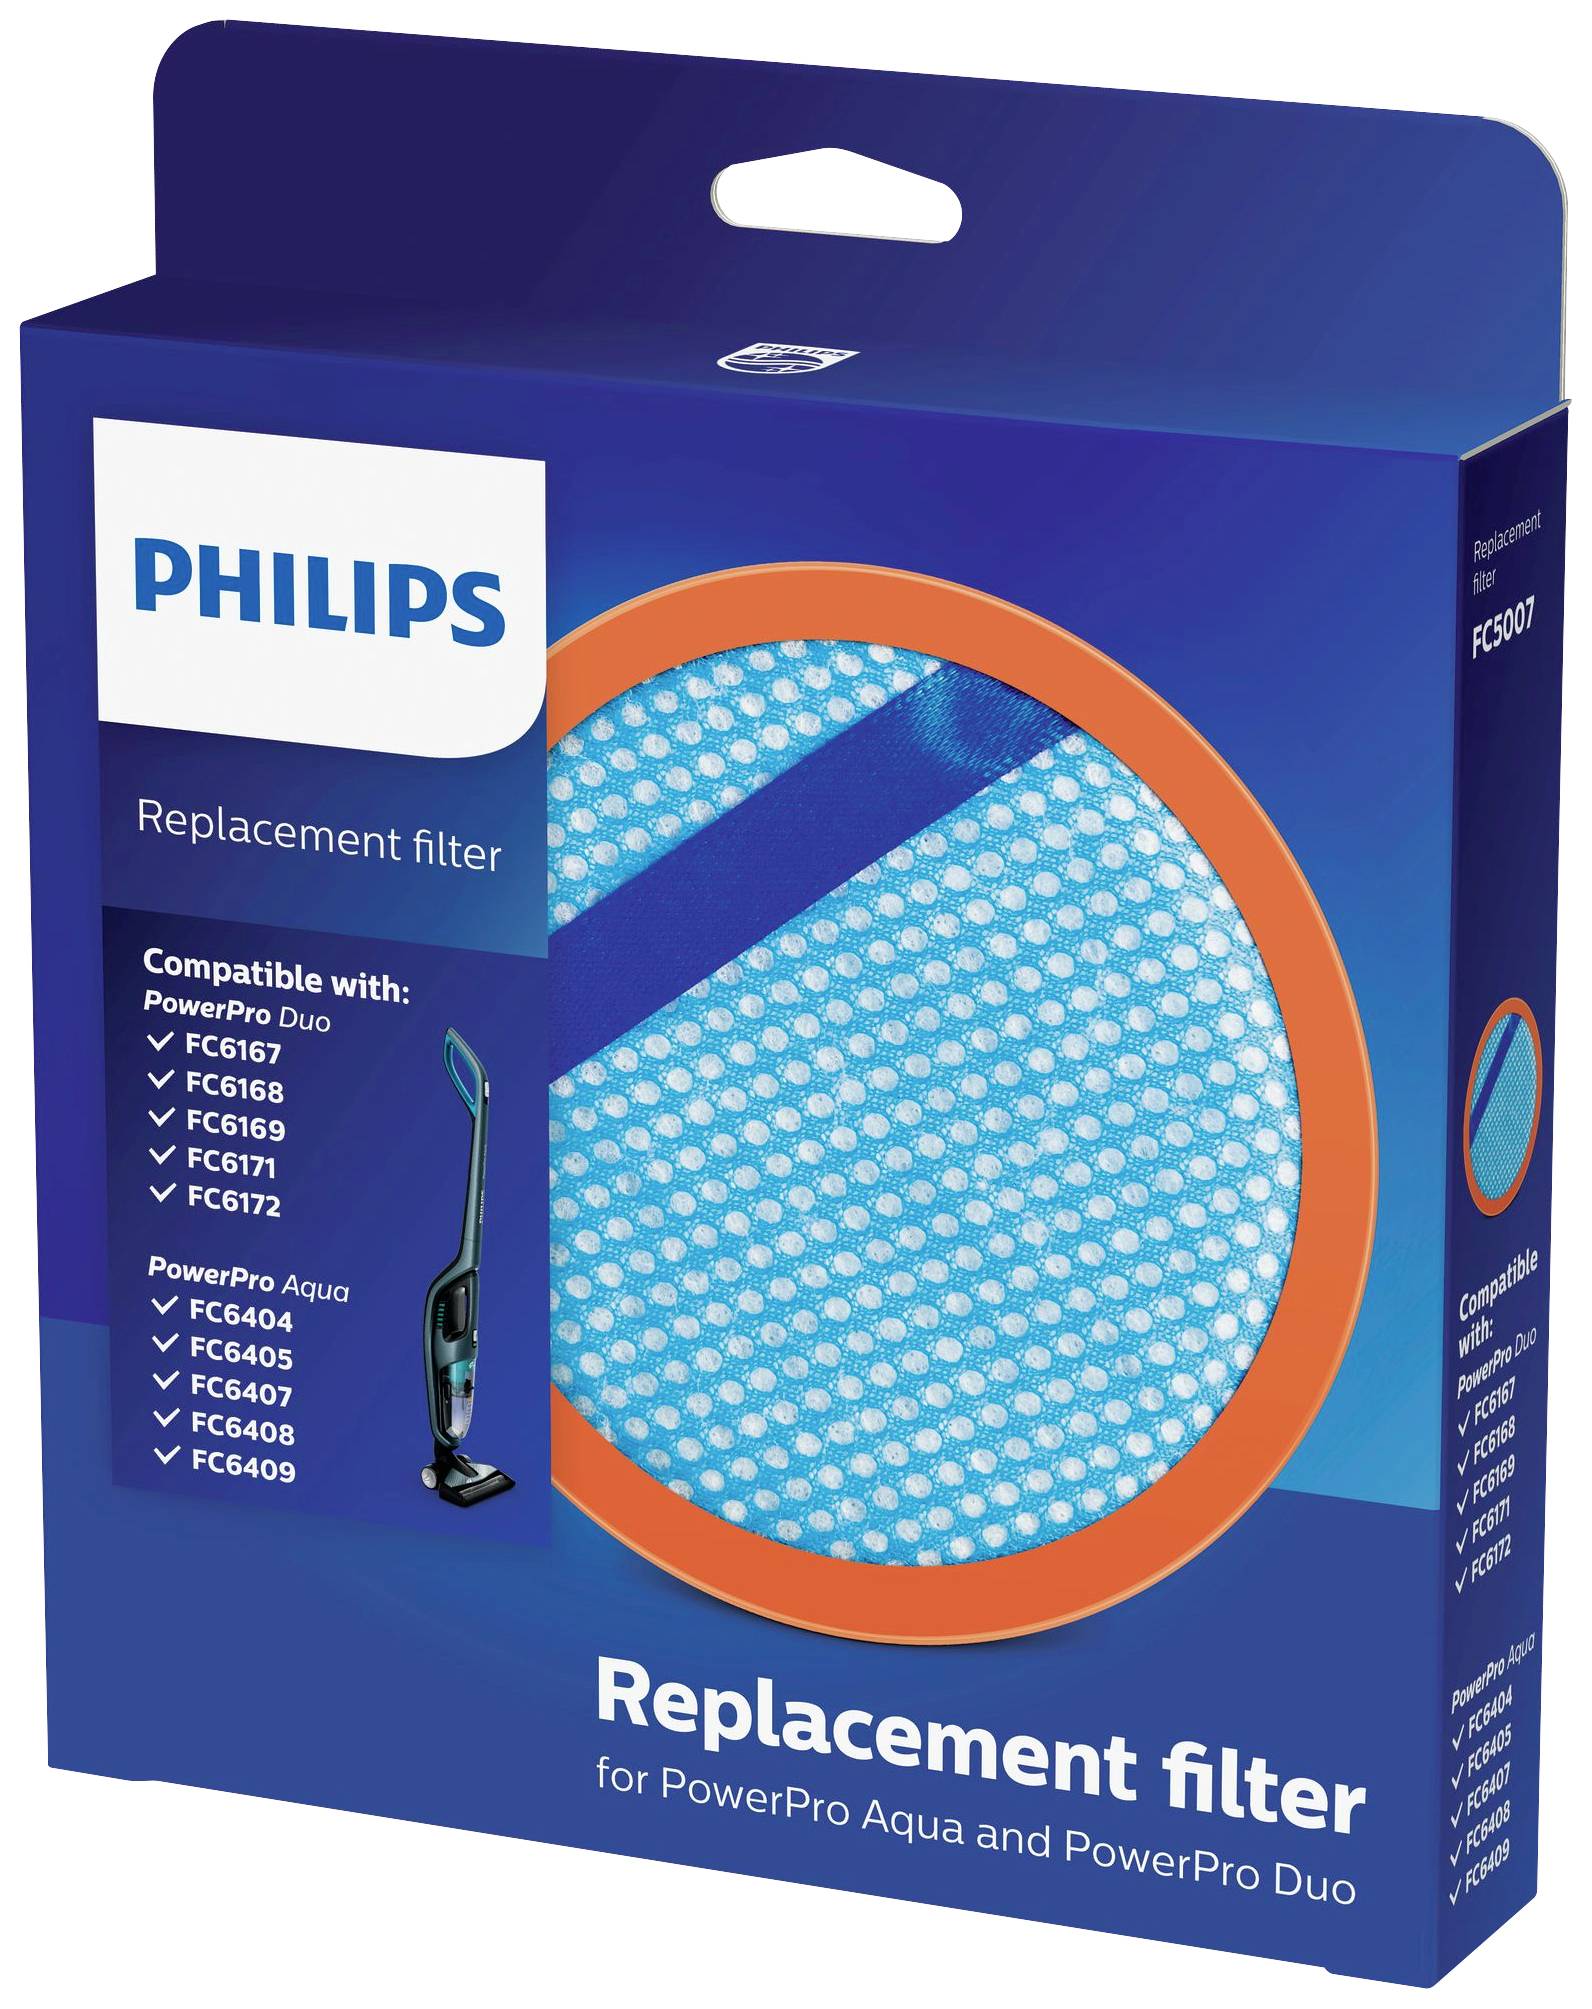 PHILIPS Domestic Appliances Philips FC5007/01, Polyester (FC5007/01)